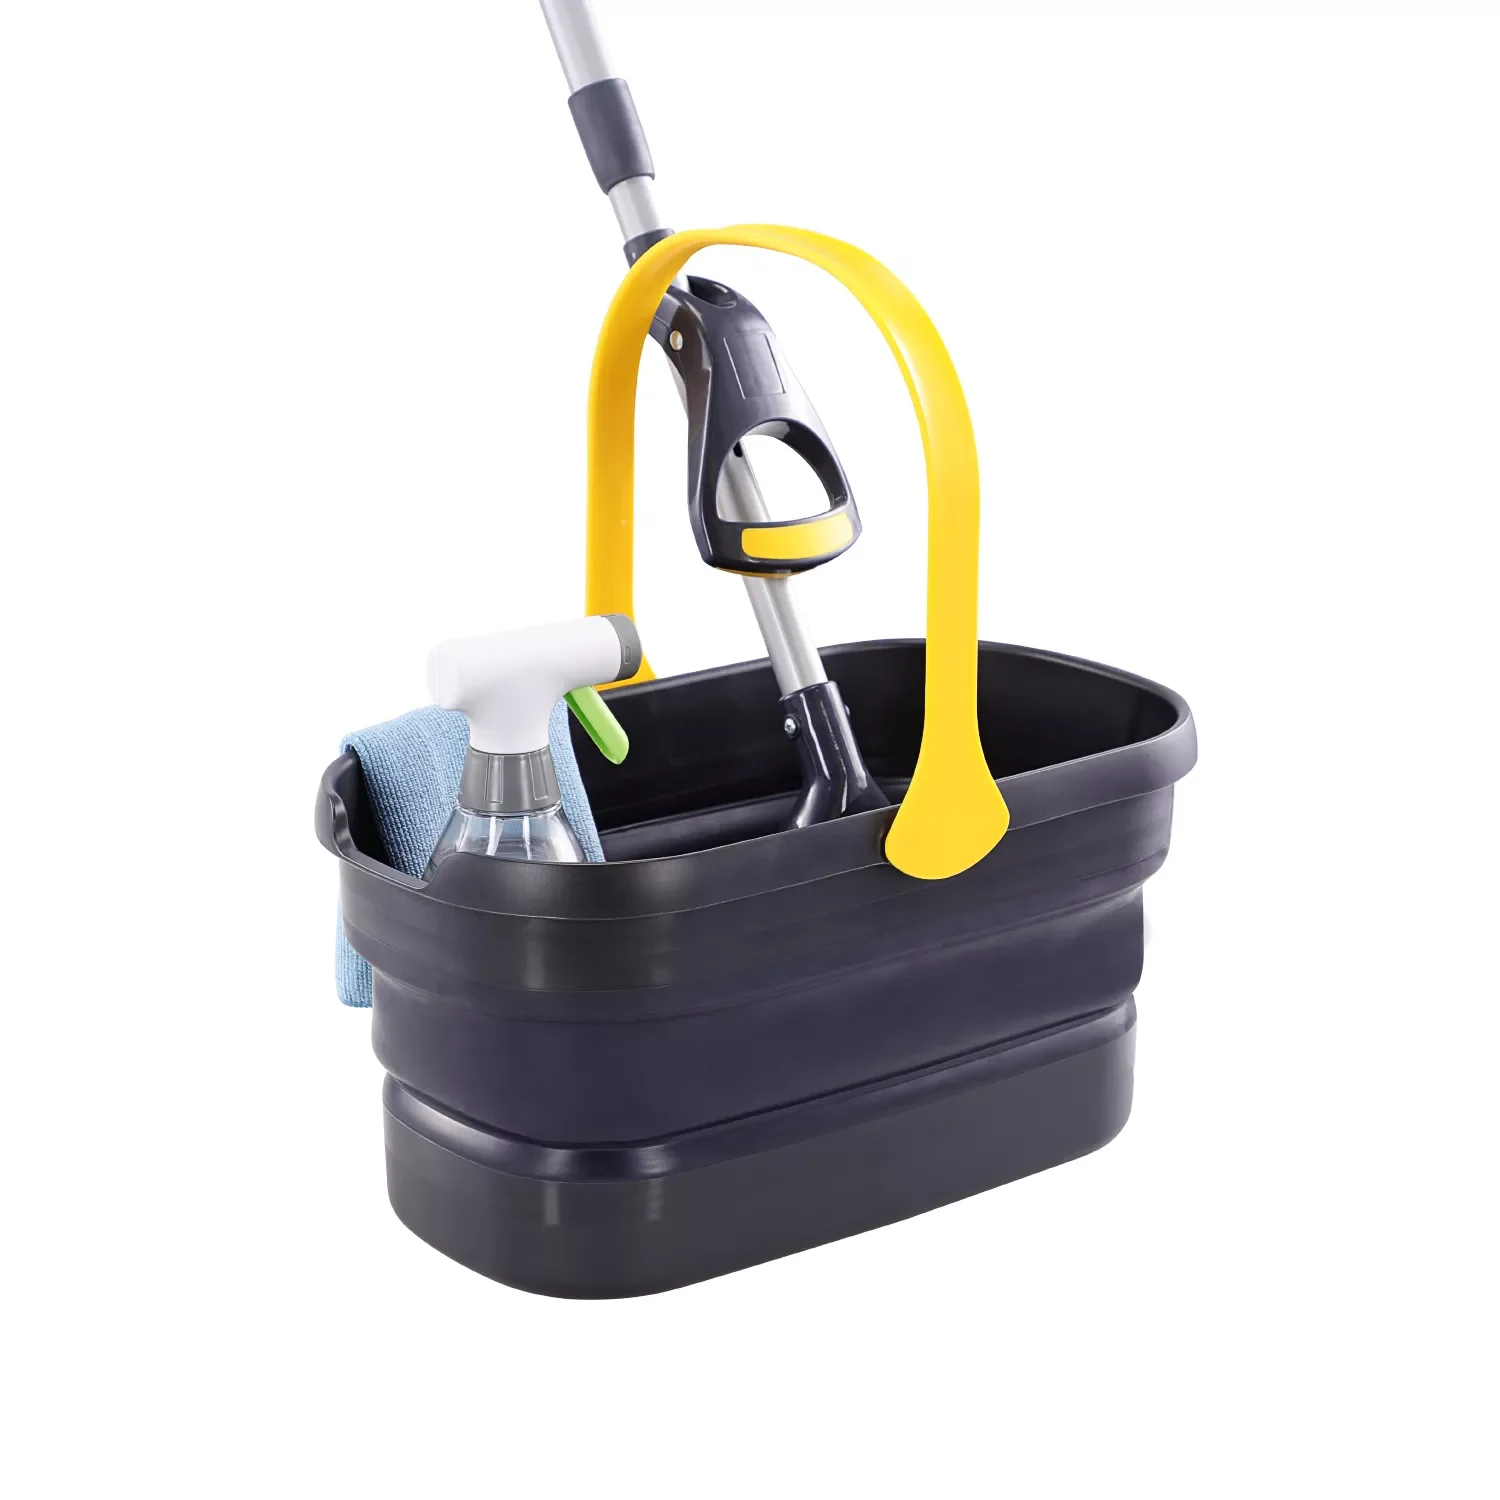 

Collapsible Sinks with Drain Plug Sturdy Carry Handles for 10L Foldable Ice Buckets for Washing Mop Portable Wash Basin